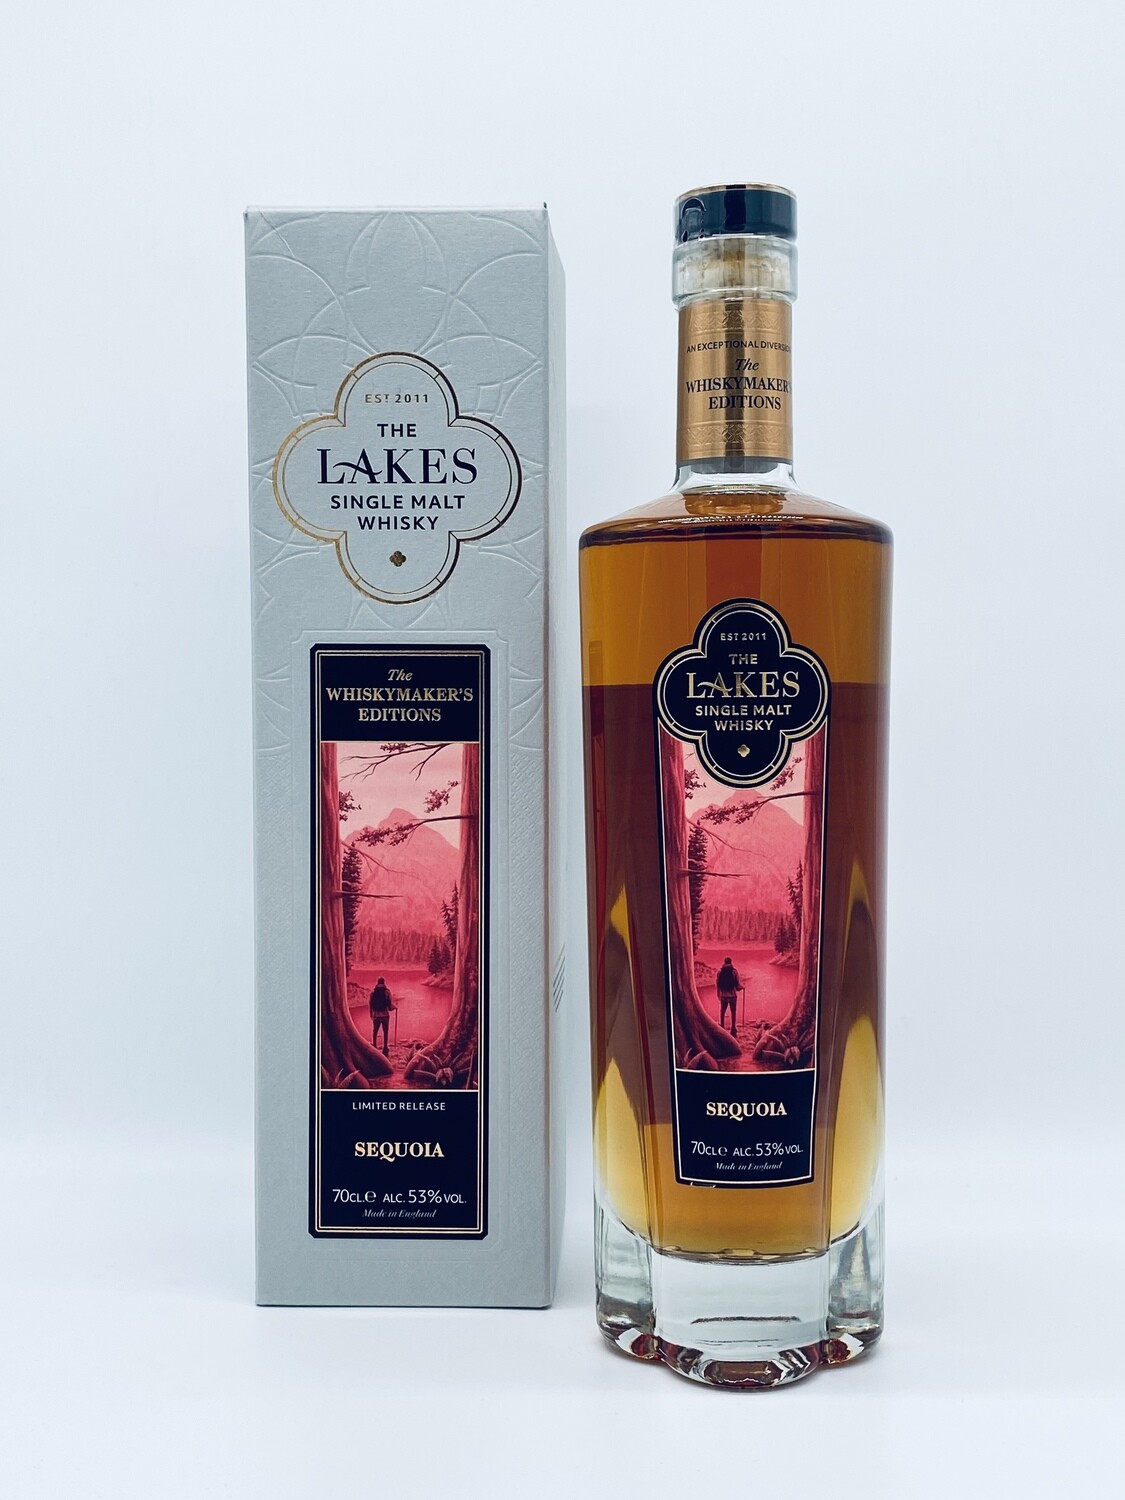 The Lakes one whiskymaker's ed. Sequoia